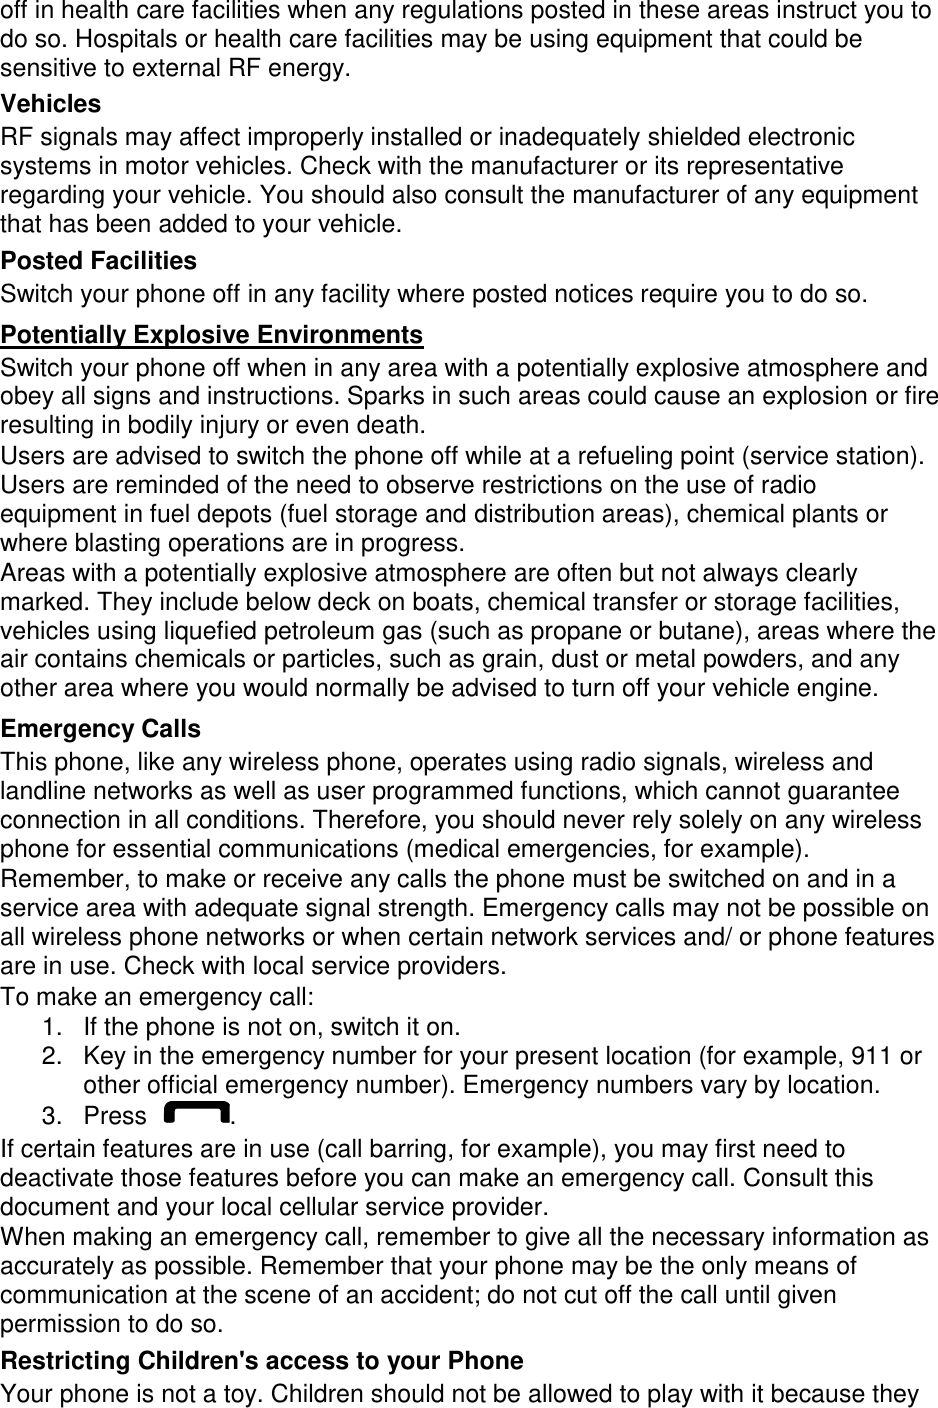 off in health care facilities when any regulations posted in these areas instruct you to do so. Hospitals or health care facilities may be using equipment that could be sensitive to external RF energy. Vehicles RF signals may affect improperly installed or inadequately shielded electronic systems in motor vehicles. Check with the manufacturer or its representative regarding your vehicle. You should also consult the manufacturer of any equipment that has been added to your vehicle. Posted Facilities Switch your phone off in any facility where posted notices require you to do so. Potentially Explosive Environments Switch your phone off when in any area with a potentially explosive atmosphere and obey all signs and instructions. Sparks in such areas could cause an explosion or fire resulting in bodily injury or even death. Users are advised to switch the phone off while at a refueling point (service station). Users are reminded of the need to observe restrictions on the use of radio equipment in fuel depots (fuel storage and distribution areas), chemical plants or where blasting operations are in progress. Areas with a potentially explosive atmosphere are often but not always clearly marked. They include below deck on boats, chemical transfer or storage facilities, vehicles using liquefied petroleum gas (such as propane or butane), areas where the air contains chemicals or particles, such as grain, dust or metal powders, and any other area where you would normally be advised to turn off your vehicle engine. Emergency Calls This phone, like any wireless phone, operates using radio signals, wireless and landline networks as well as user programmed functions, which cannot guarantee connection in all conditions. Therefore, you should never rely solely on any wireless phone for essential communications (medical emergencies, for example). Remember, to make or receive any calls the phone must be switched on and in a service area with adequate signal strength. Emergency calls may not be possible on all wireless phone networks or when certain network services and/ or phone features are in use. Check with local service providers. To make an emergency call: 1. If the phone is not on, switch it on.2. Key in the emergency number for your present location (for example, 911 orother official emergency number). Emergency numbers vary by location.3. Press . If certain features are in use (call barring, for example), you may first need to deactivate those features before you can make an emergency call. Consult this document and your local cellular service provider. When making an emergency call, remember to give all the necessary information as accurately as possible. Remember that your phone may be the only means of communication at the scene of an accident; do not cut off the call until given permission to do so. Restricting Children&apos;s access to your Phone Your phone is not a toy. Children should not be allowed to play with it because they 